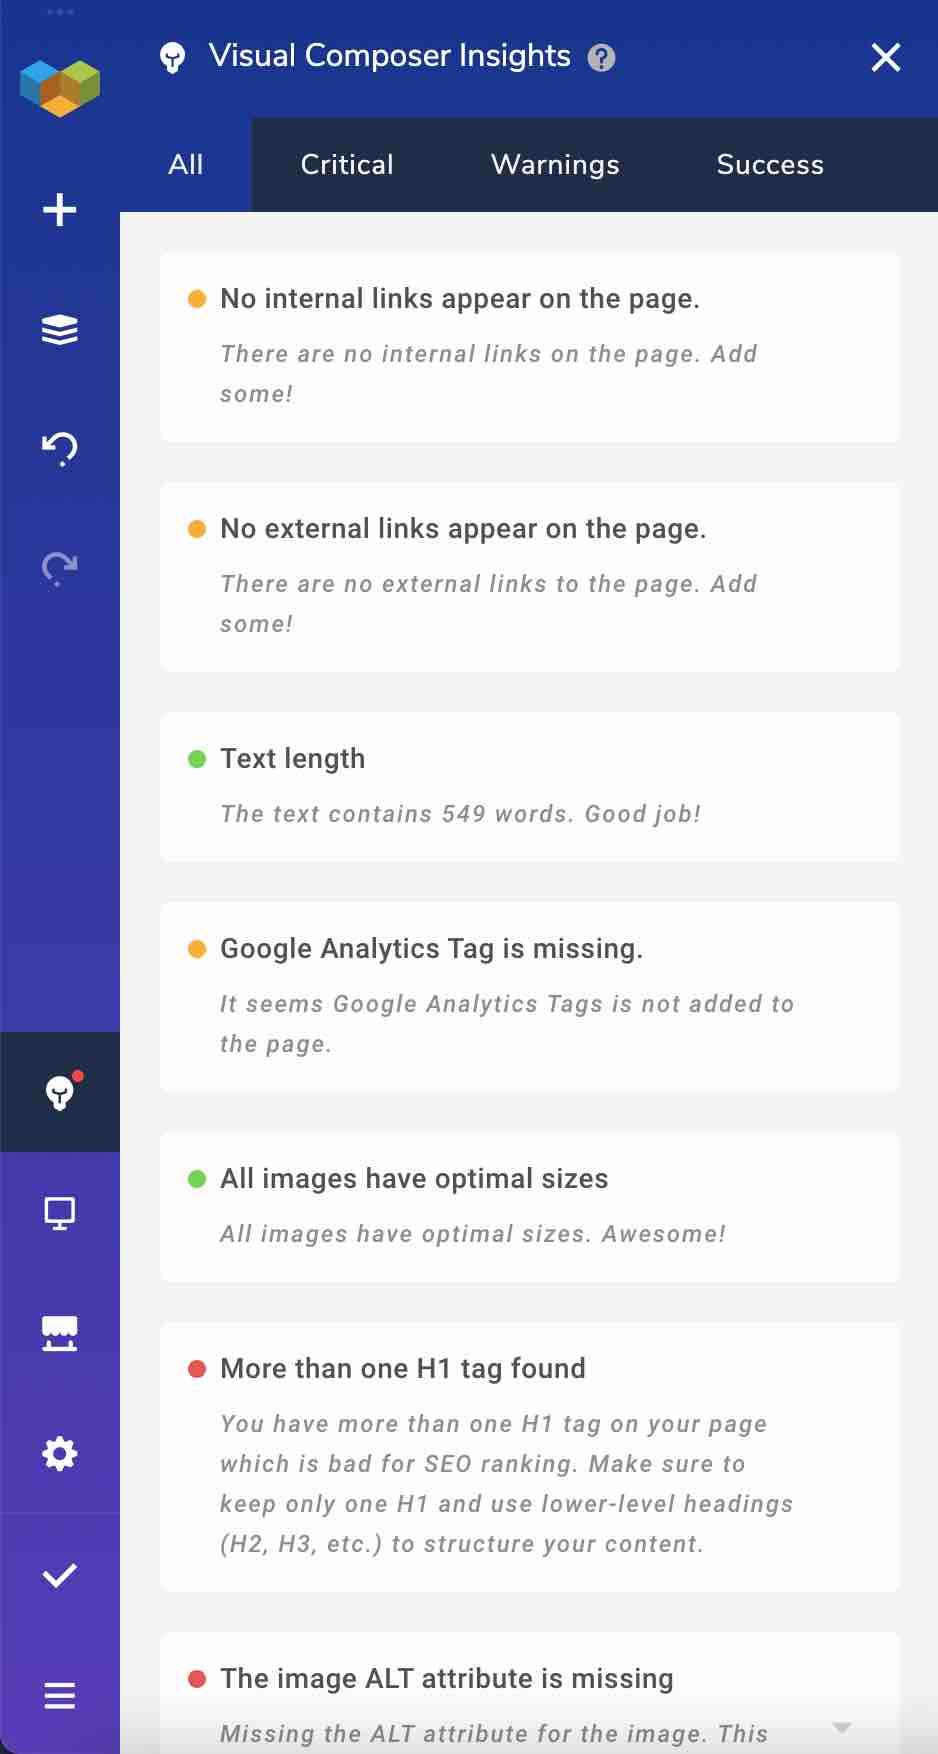 Visual Composer Insights for SEO recommendations and warnings.